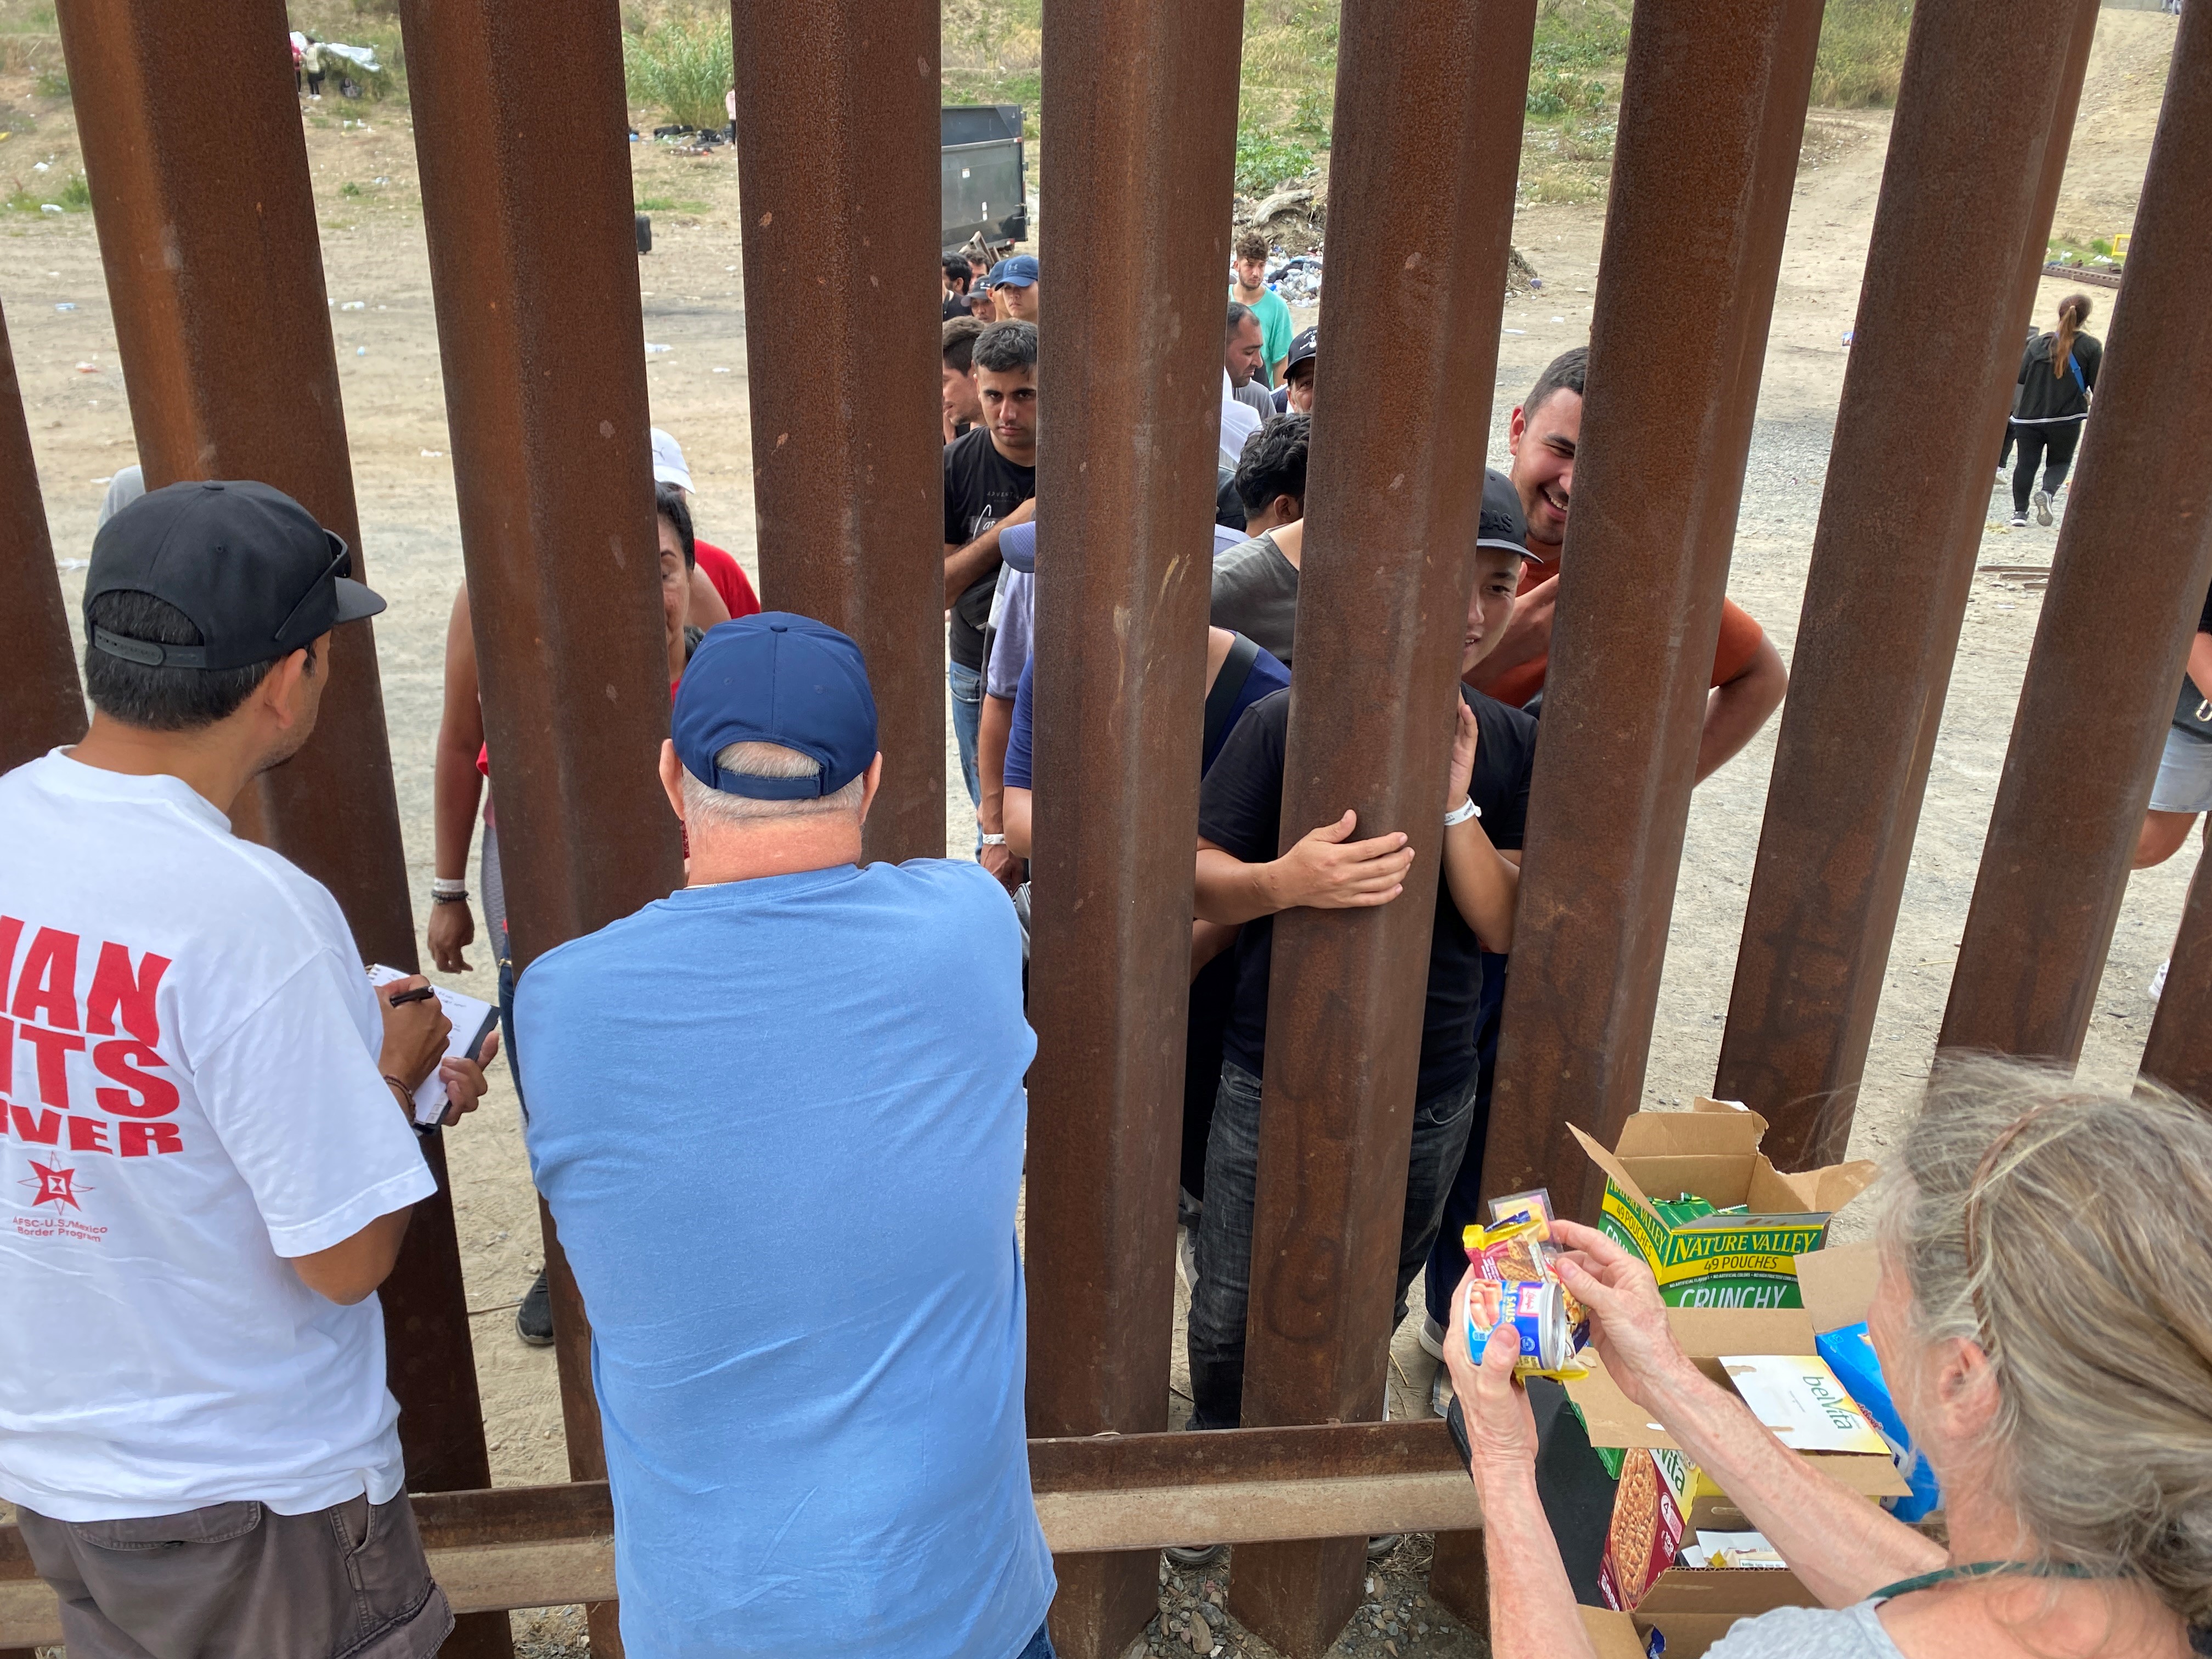 Humanitarian activists distribute snacks and other goods to asylum-seeking migrants at the U.S.-Mexico border south of San Diego on Sept. 12, 2023.